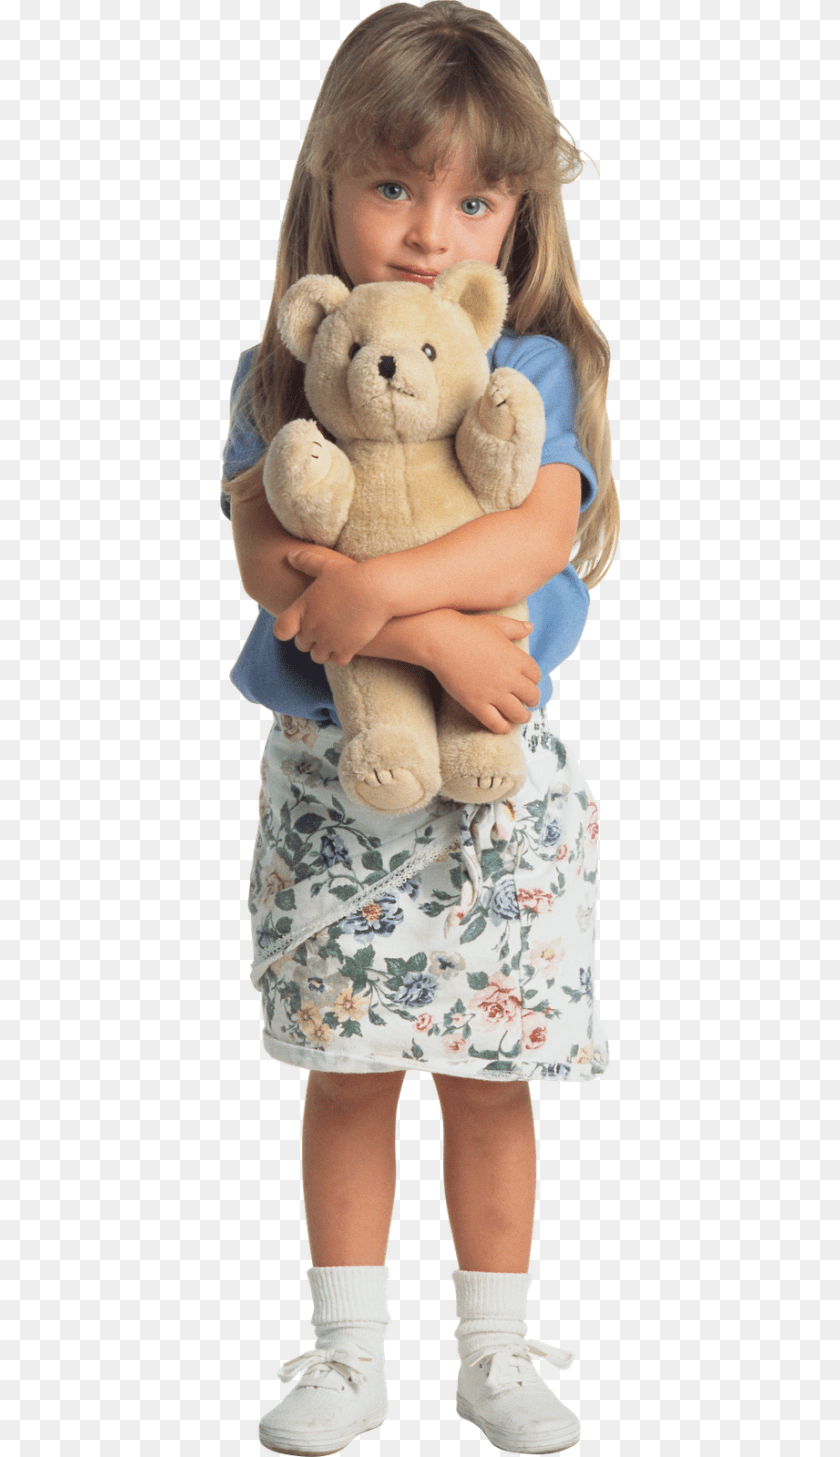 400x1457 Kid Download Image With Background Portable Network Graphics, Child, Teddy Bear, Person, Girl Transparent PNG